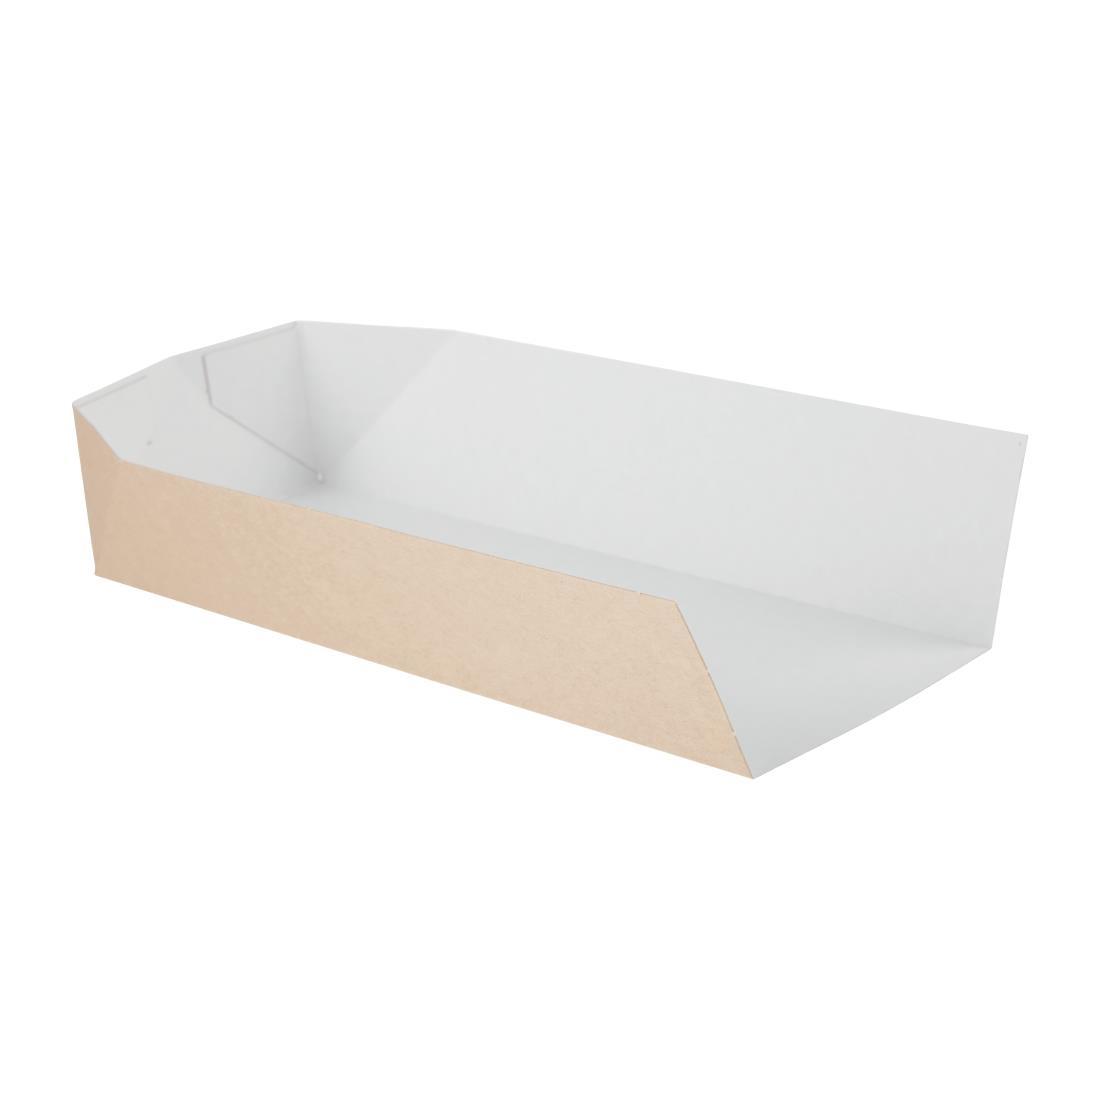 Colpac Compostable Open-Ended Food Trays 250mm (Pack of 500) - CK937  - 1